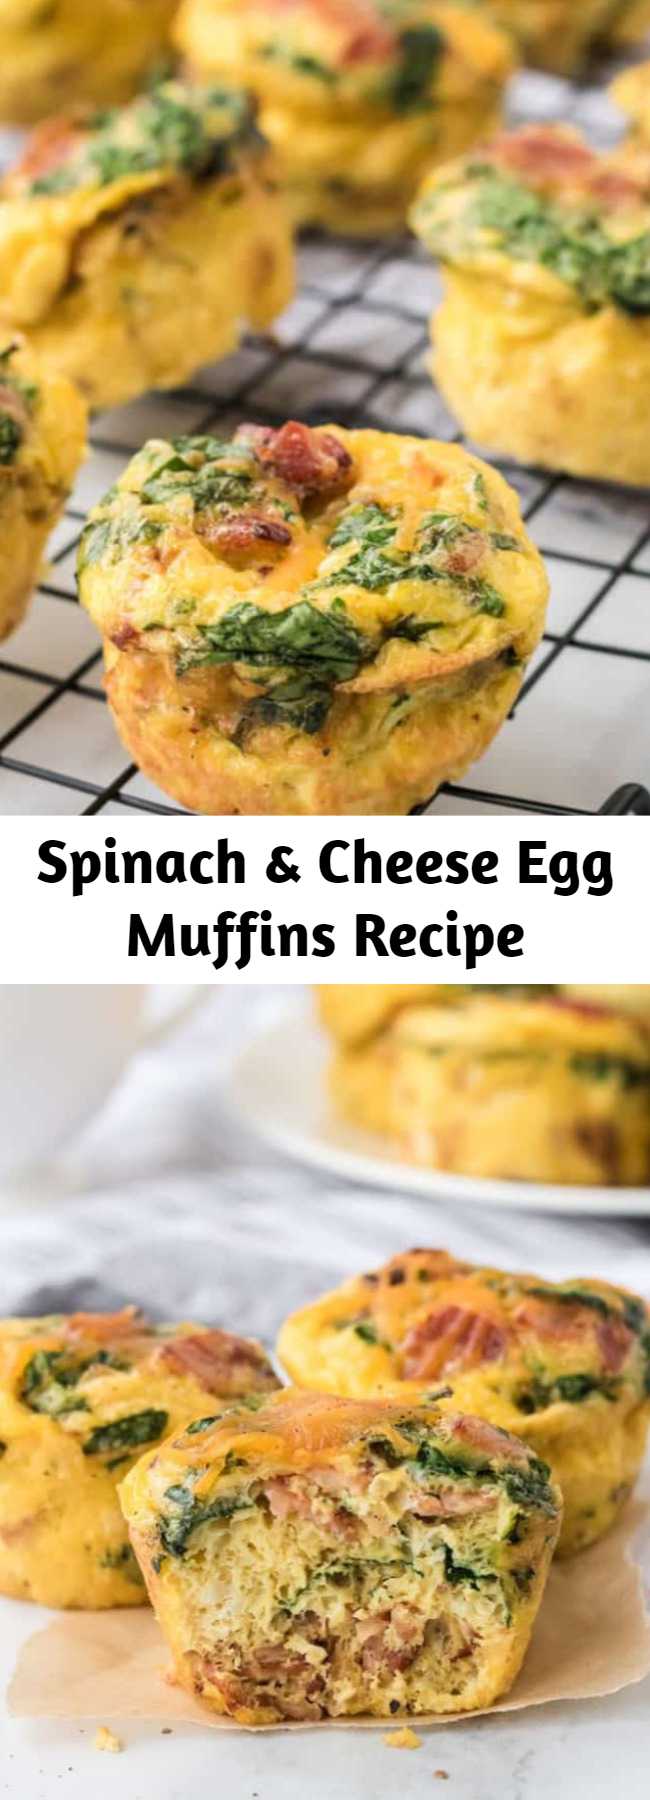 Spinach & Cheese Egg Muffins Recipe – Mom Secret Ingrediets